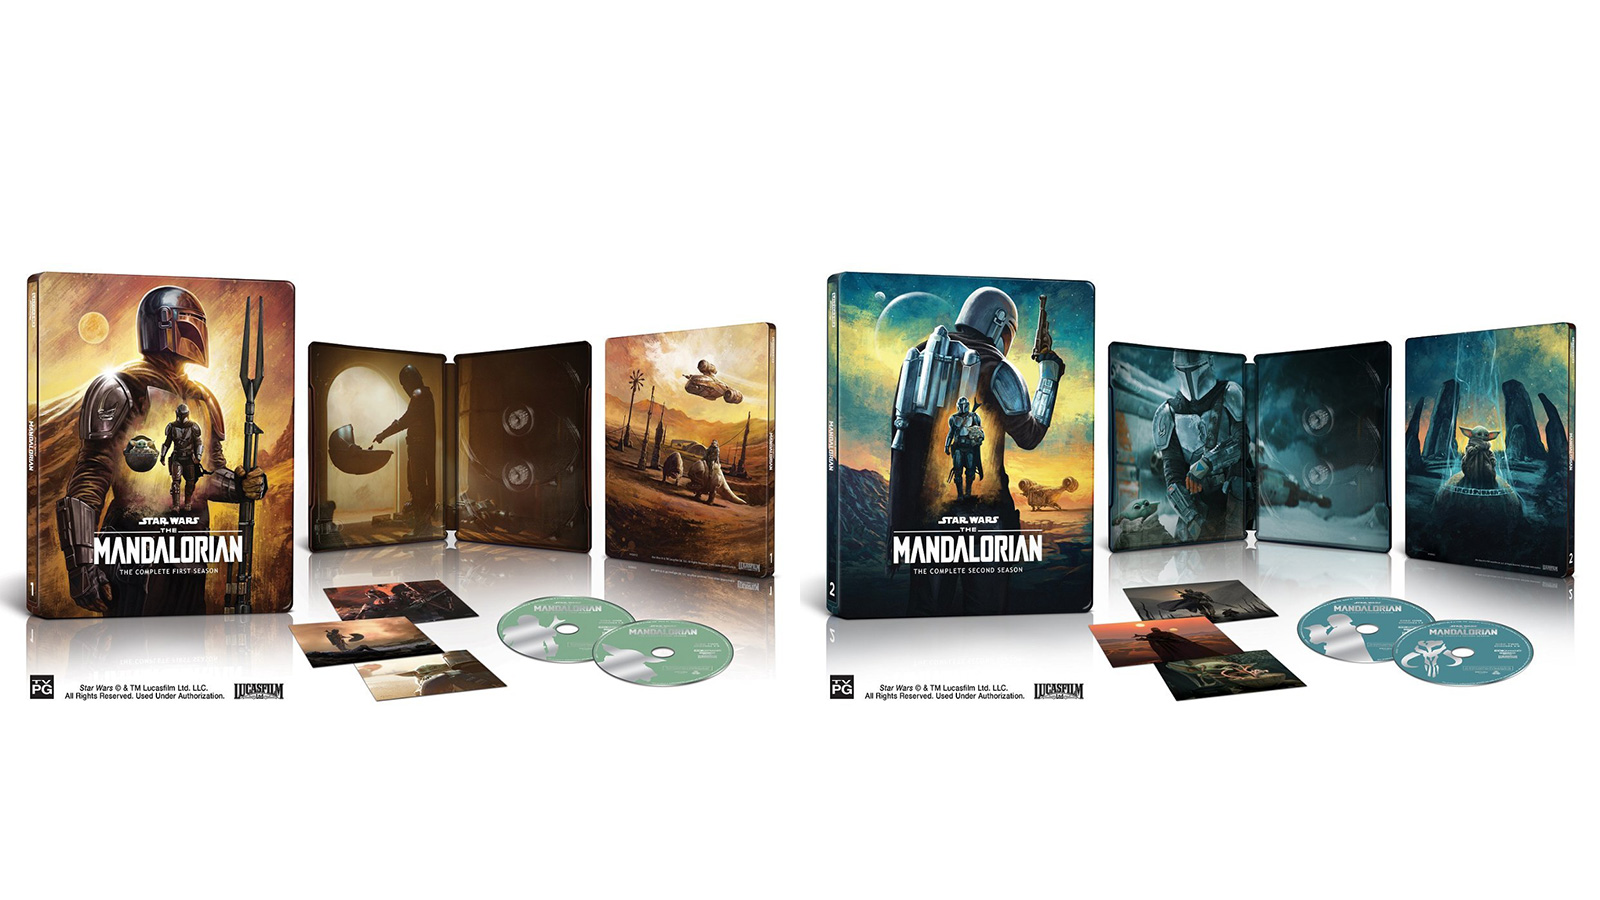 Available For Preorder At Amazon - The Mandalorian Season 1 & 2 Steelbook Sets